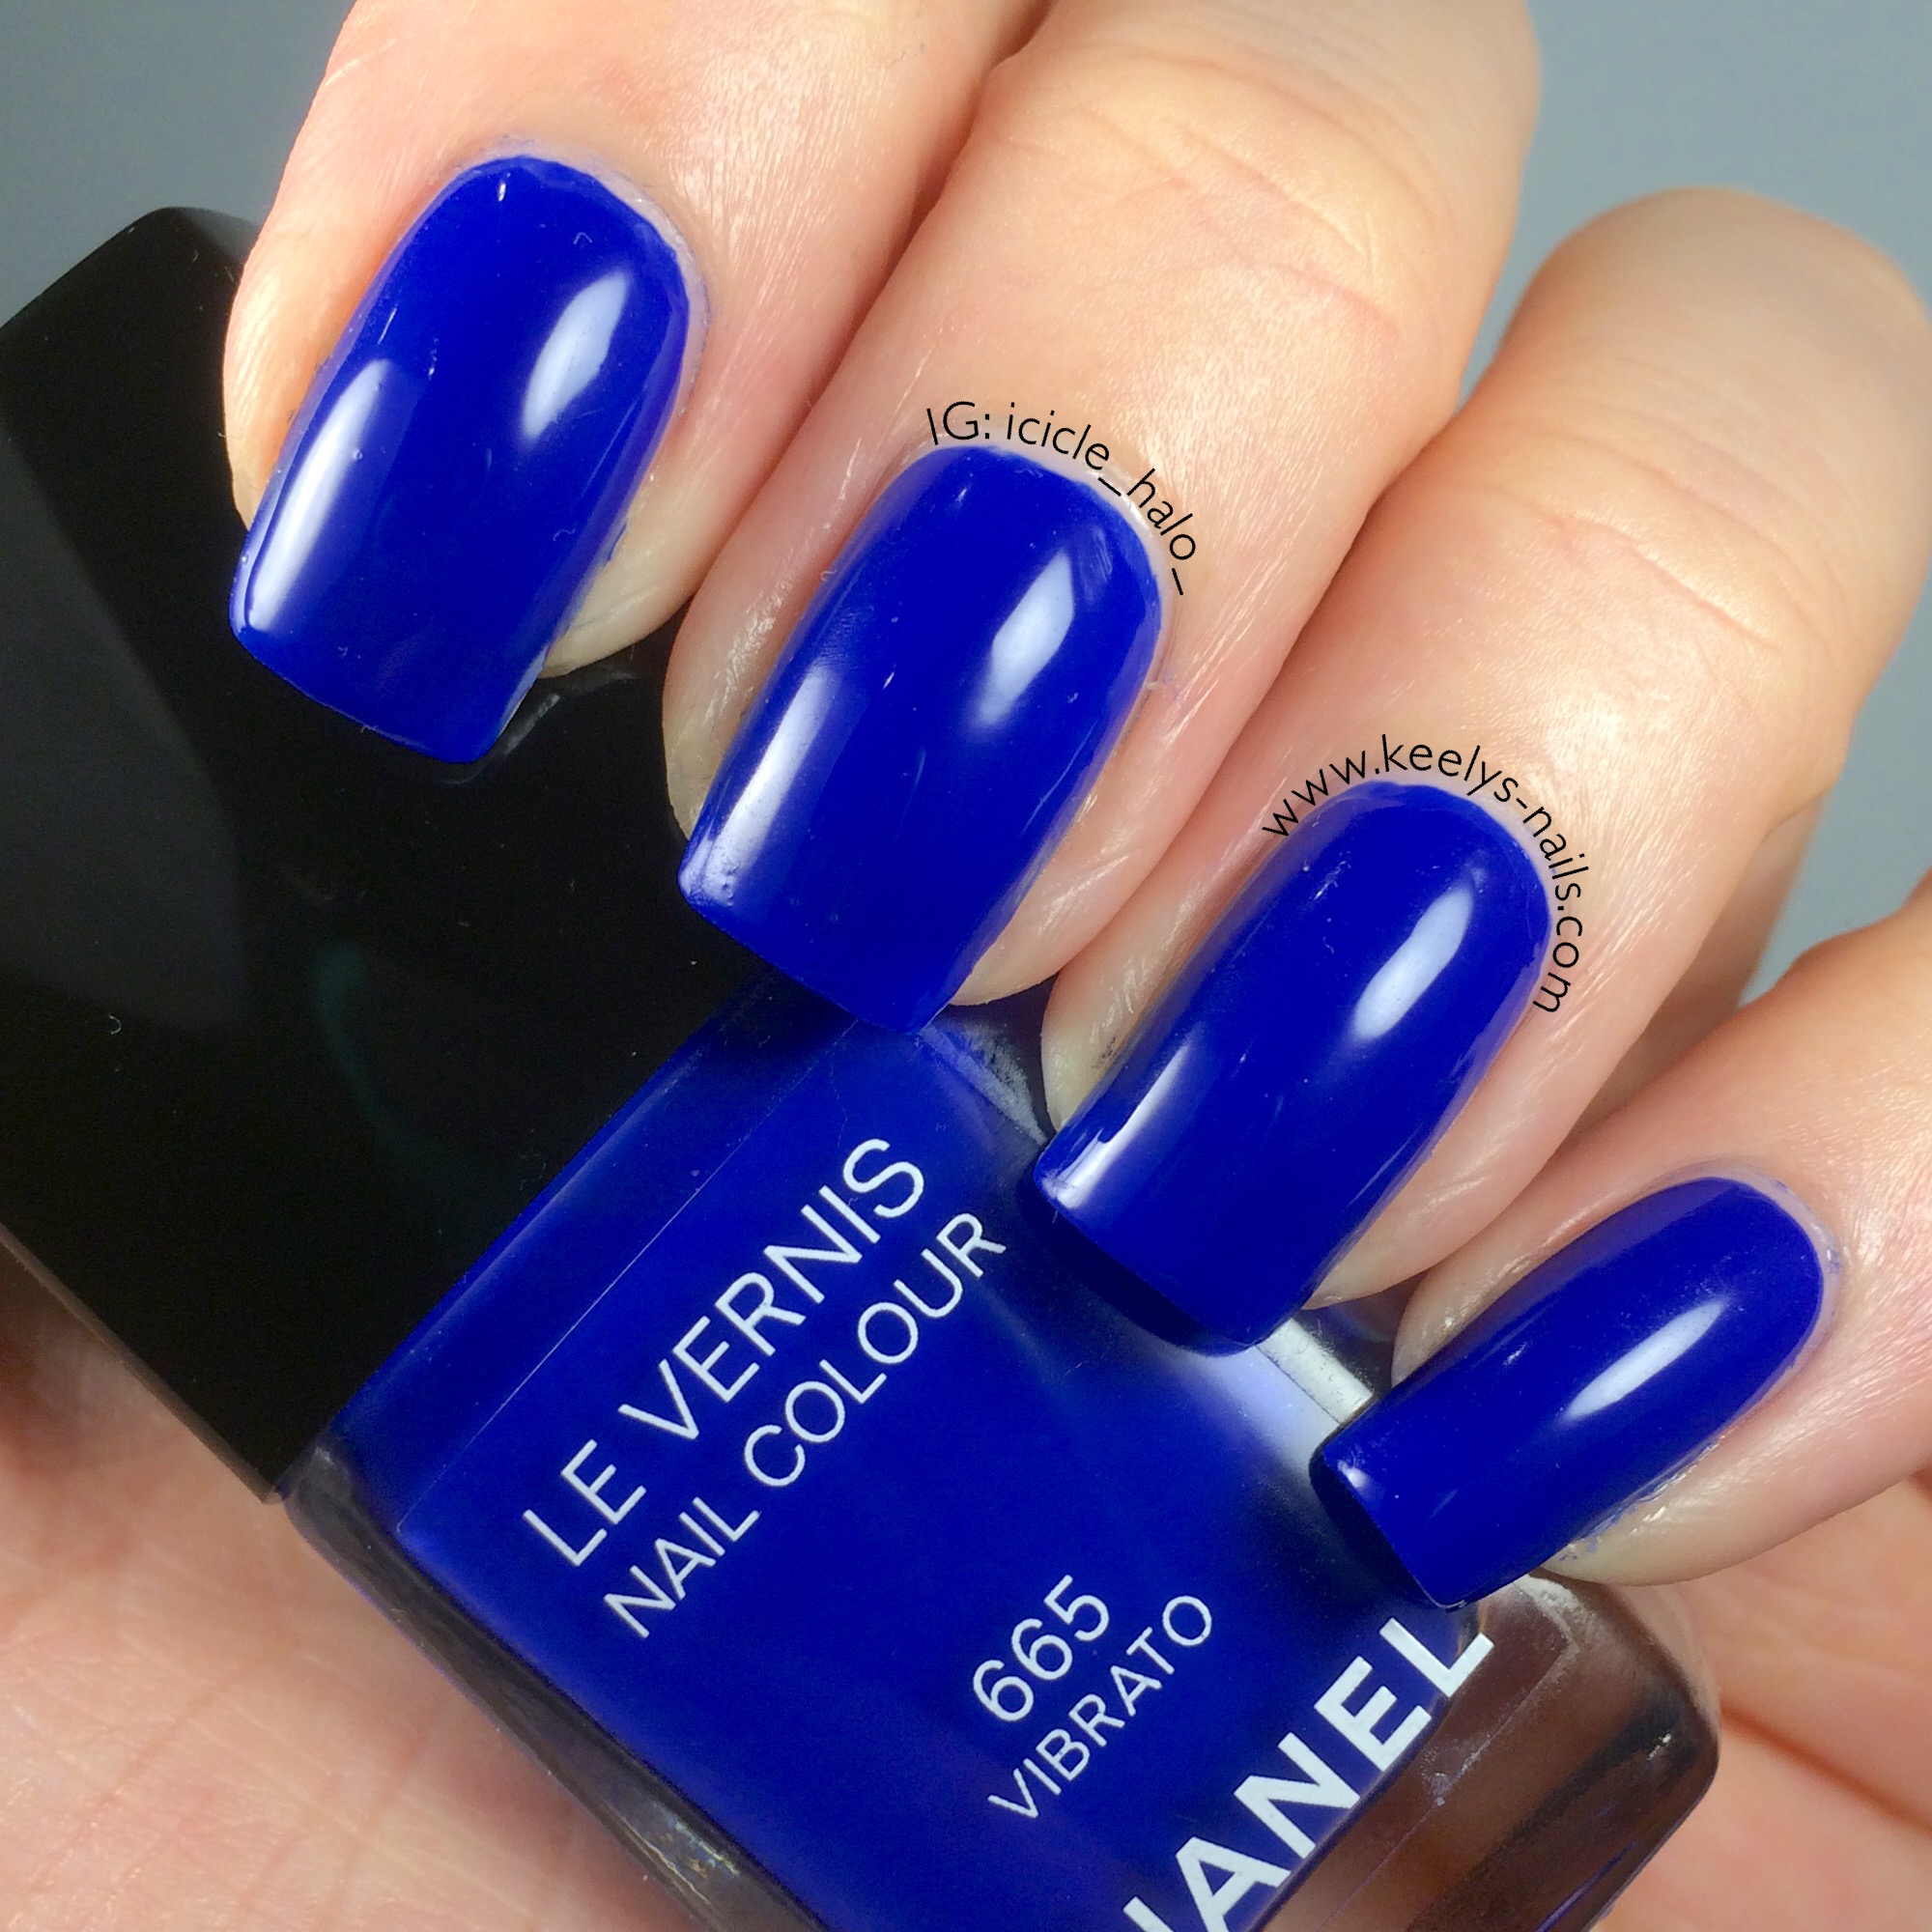 Chanel Vibrato 665 swatch | Keely's Nails